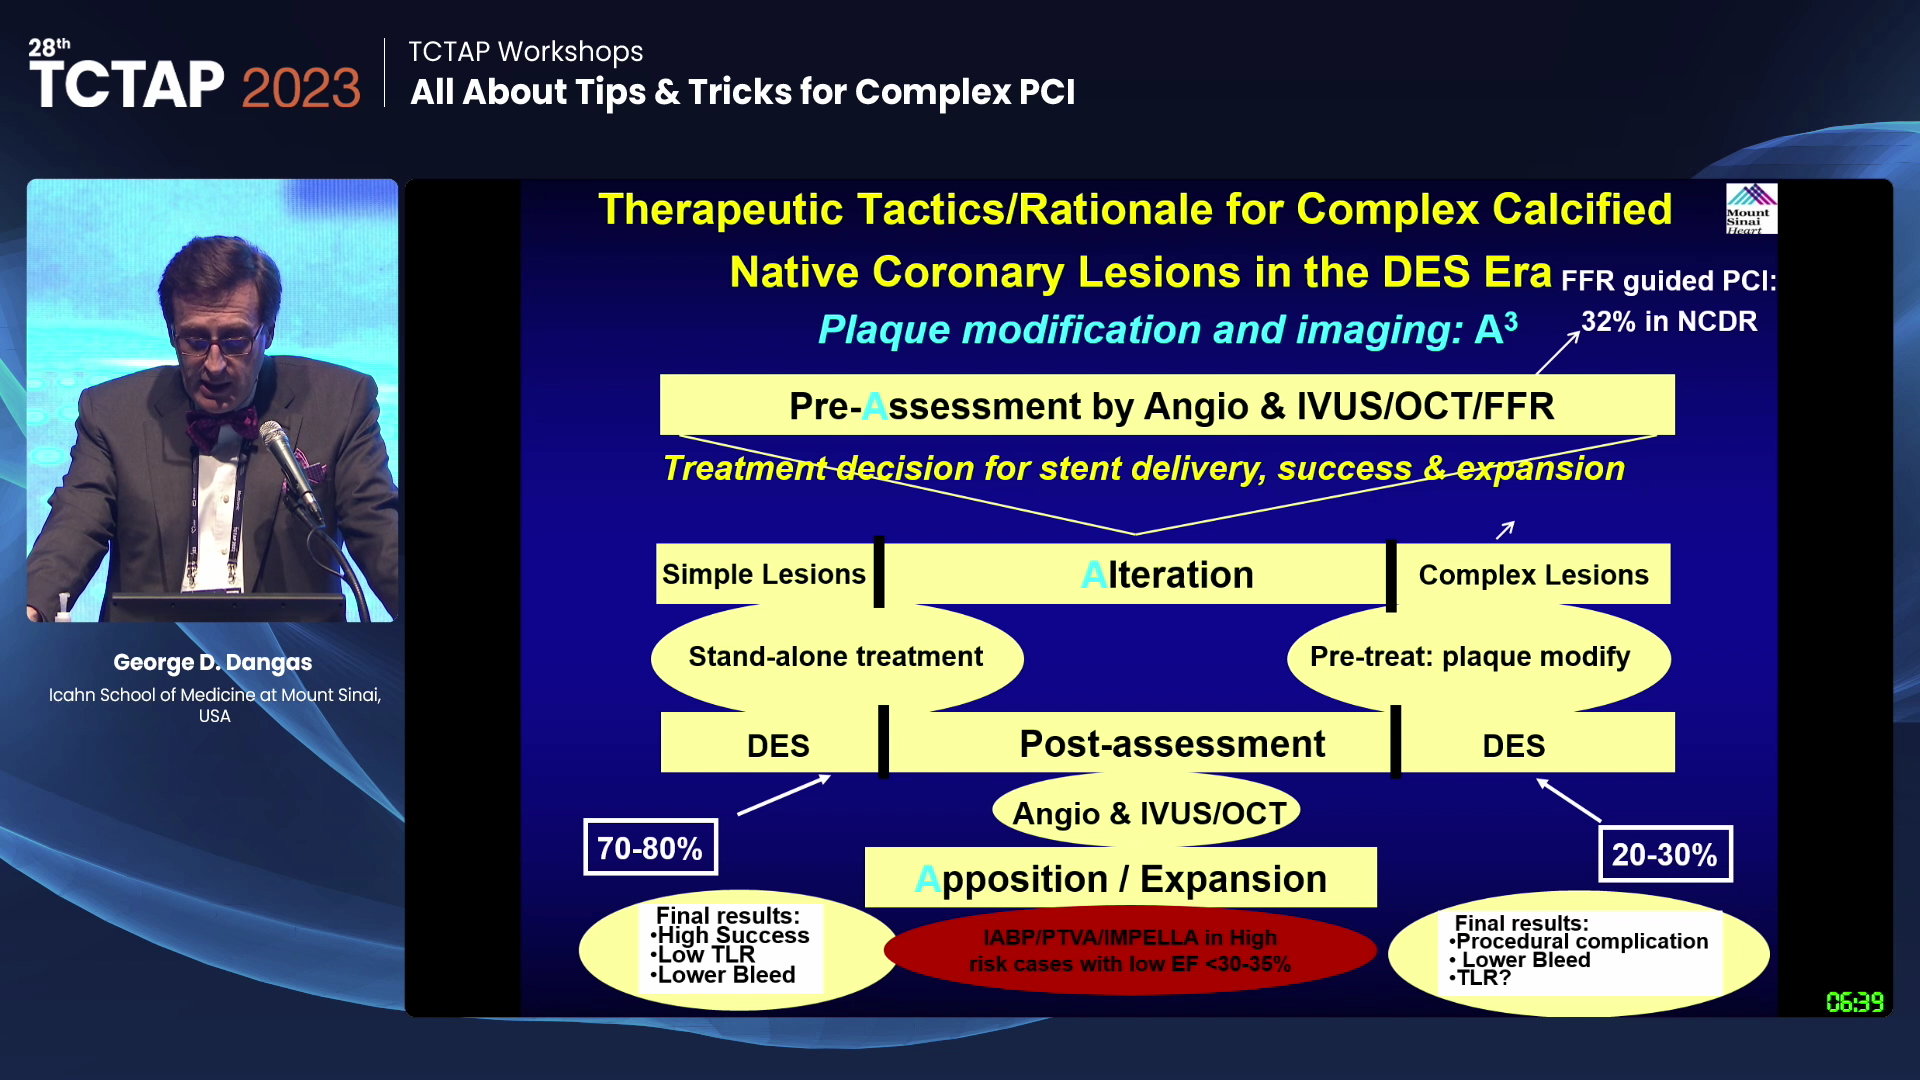 [TCTAP Workshops] All About Tips & Tricks for Complex PCI